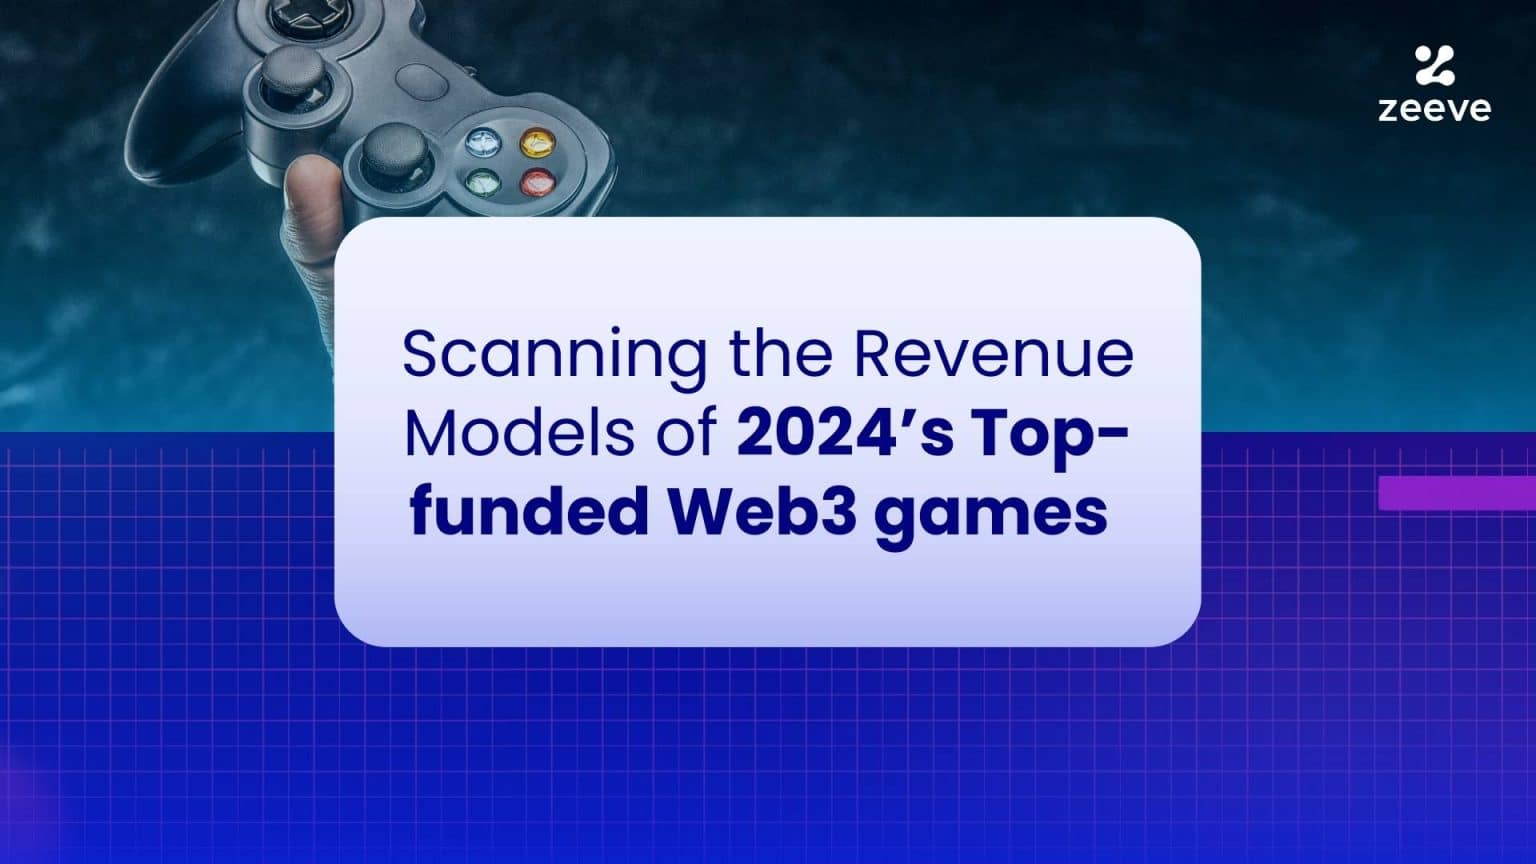 Scanning-the-Revenue-Models-of-2024s-Top-funded-Web3-games--1536x864.jpg